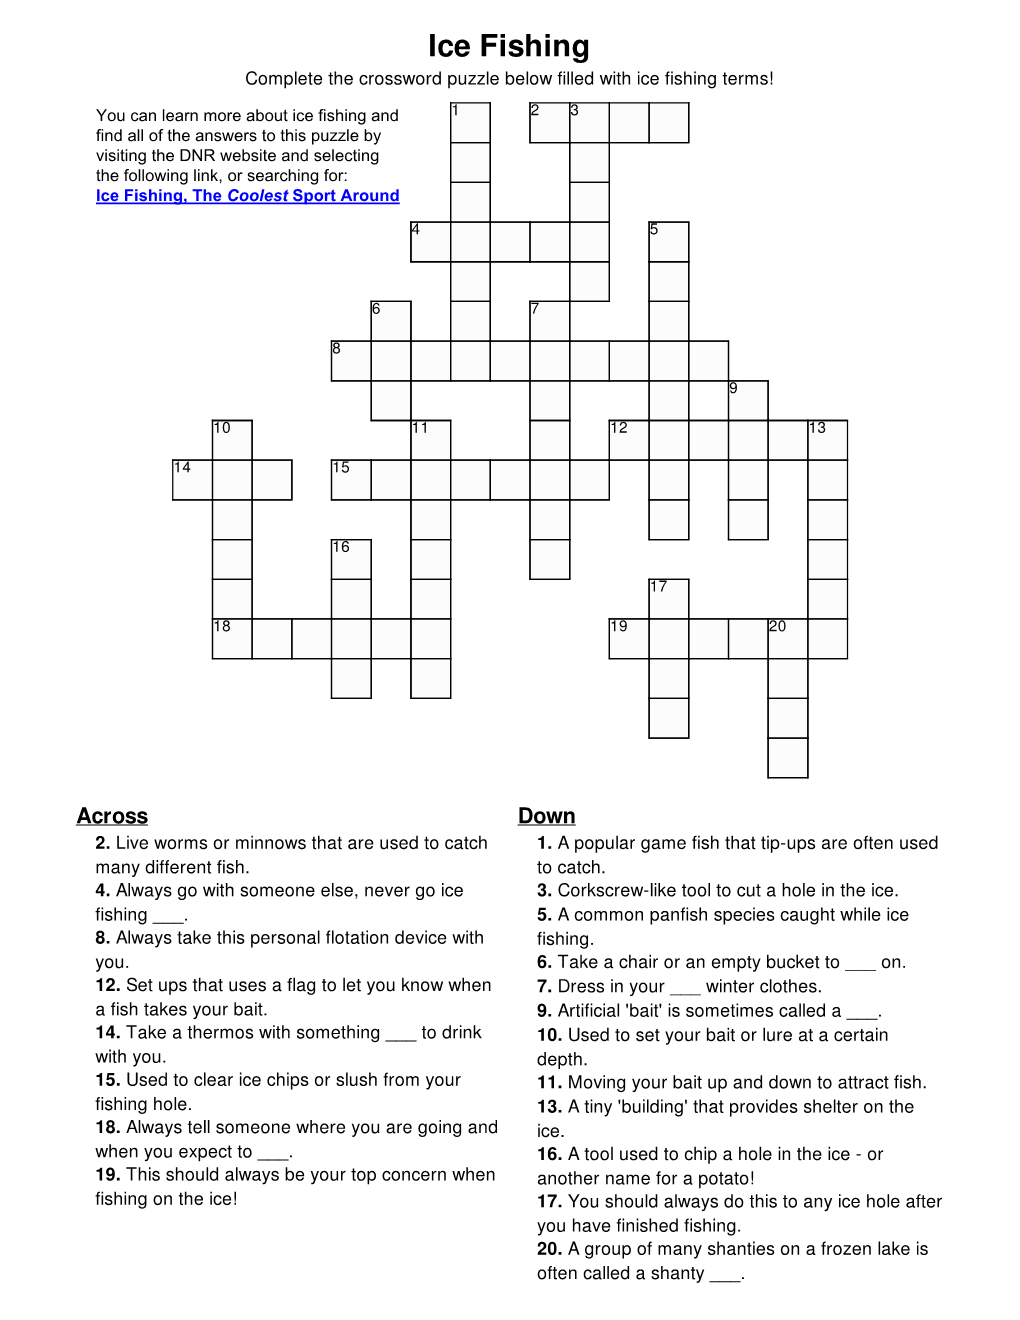 Ice Fishing Crossword Puzzle With